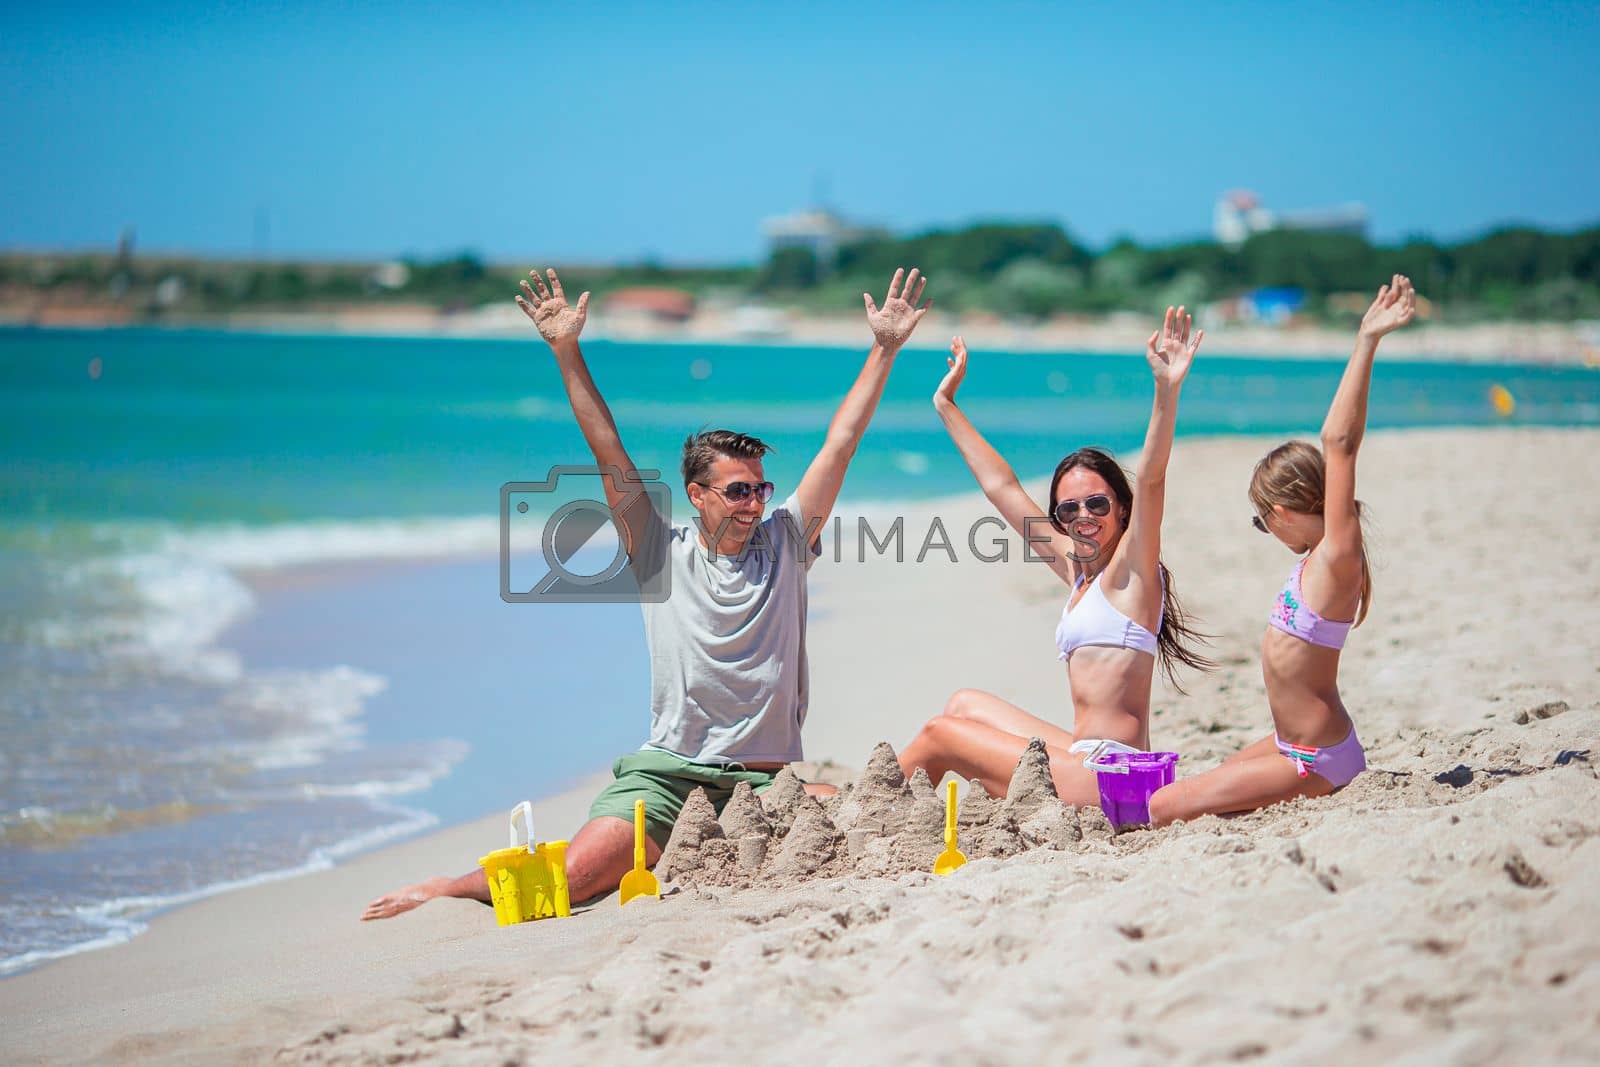 Royalty free image of Family enjoying time on the beach making sand castle together on the seashore by travnikovstudio